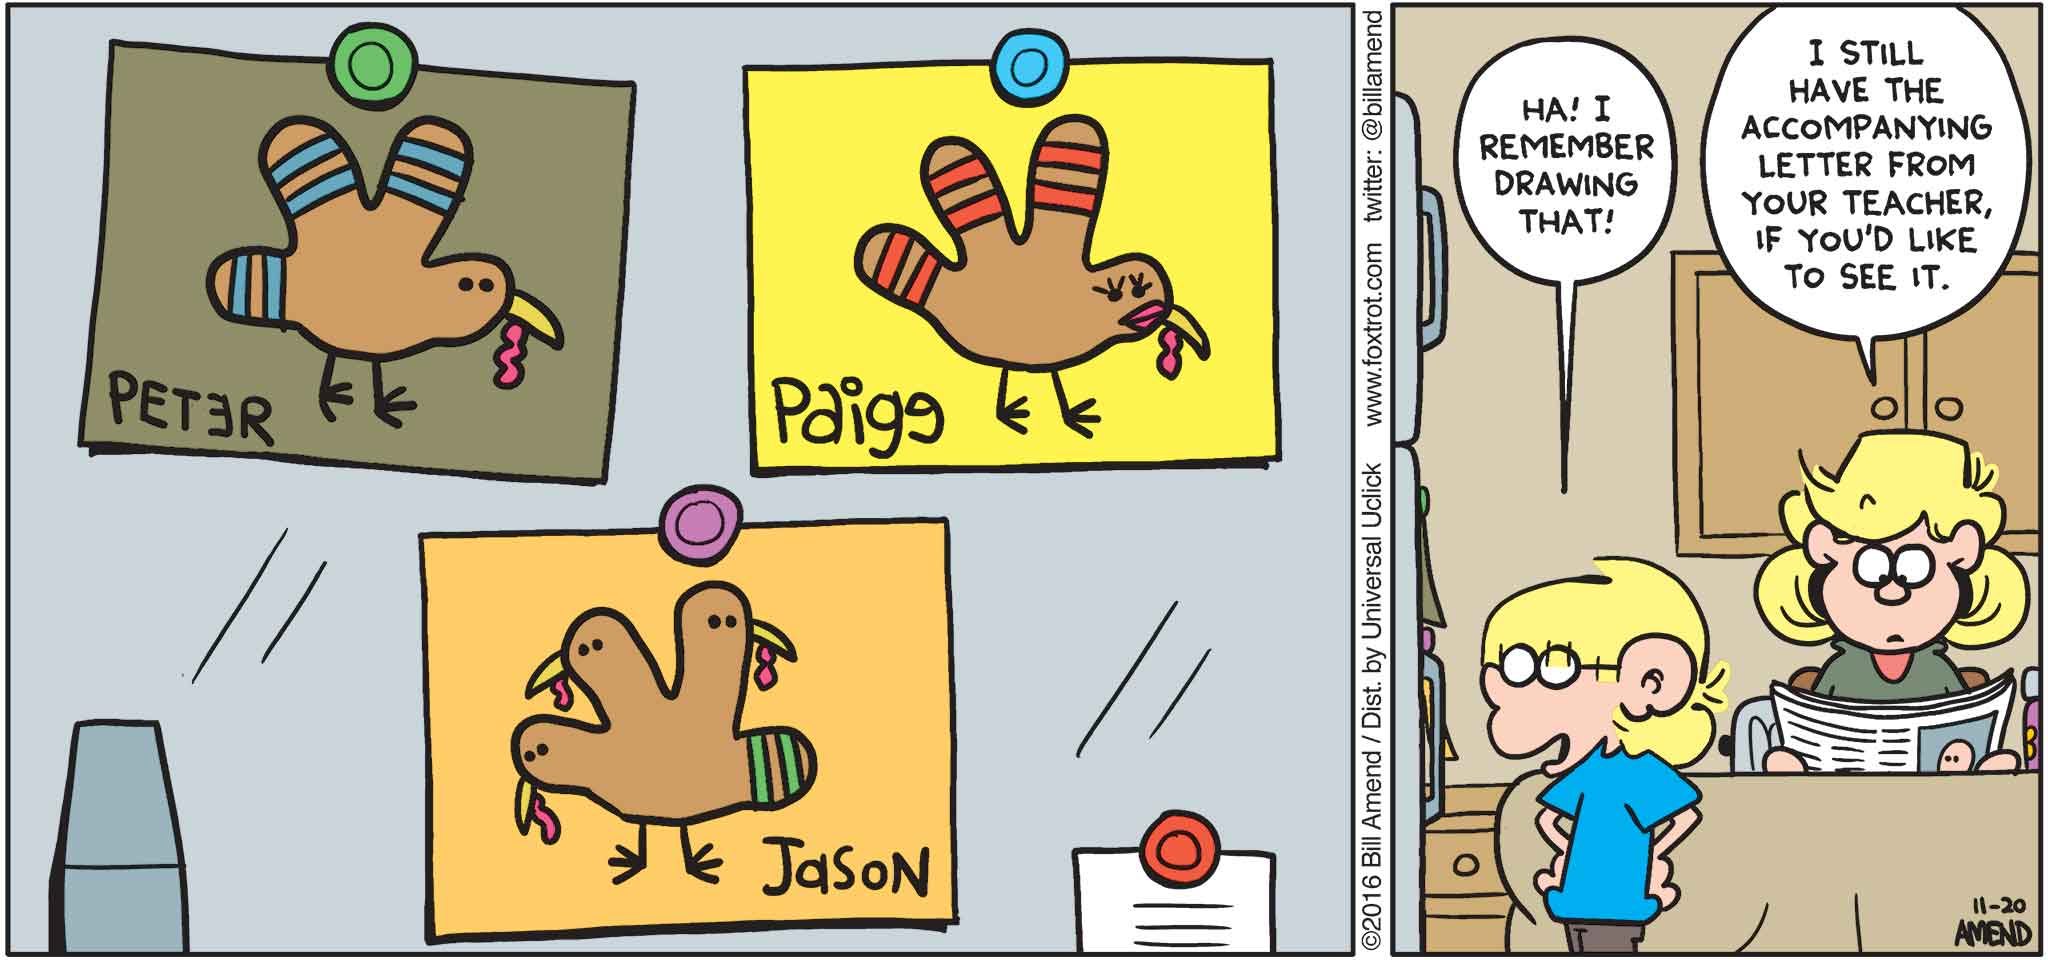 Thanksgiving Comics - FoxTrot by Bill Amend - "Handmade" published November 20, 2016 - Jason: Ha! I remember drawing that! Andy: I still have the accompanying letter from your teacher, if you'd like to see it.